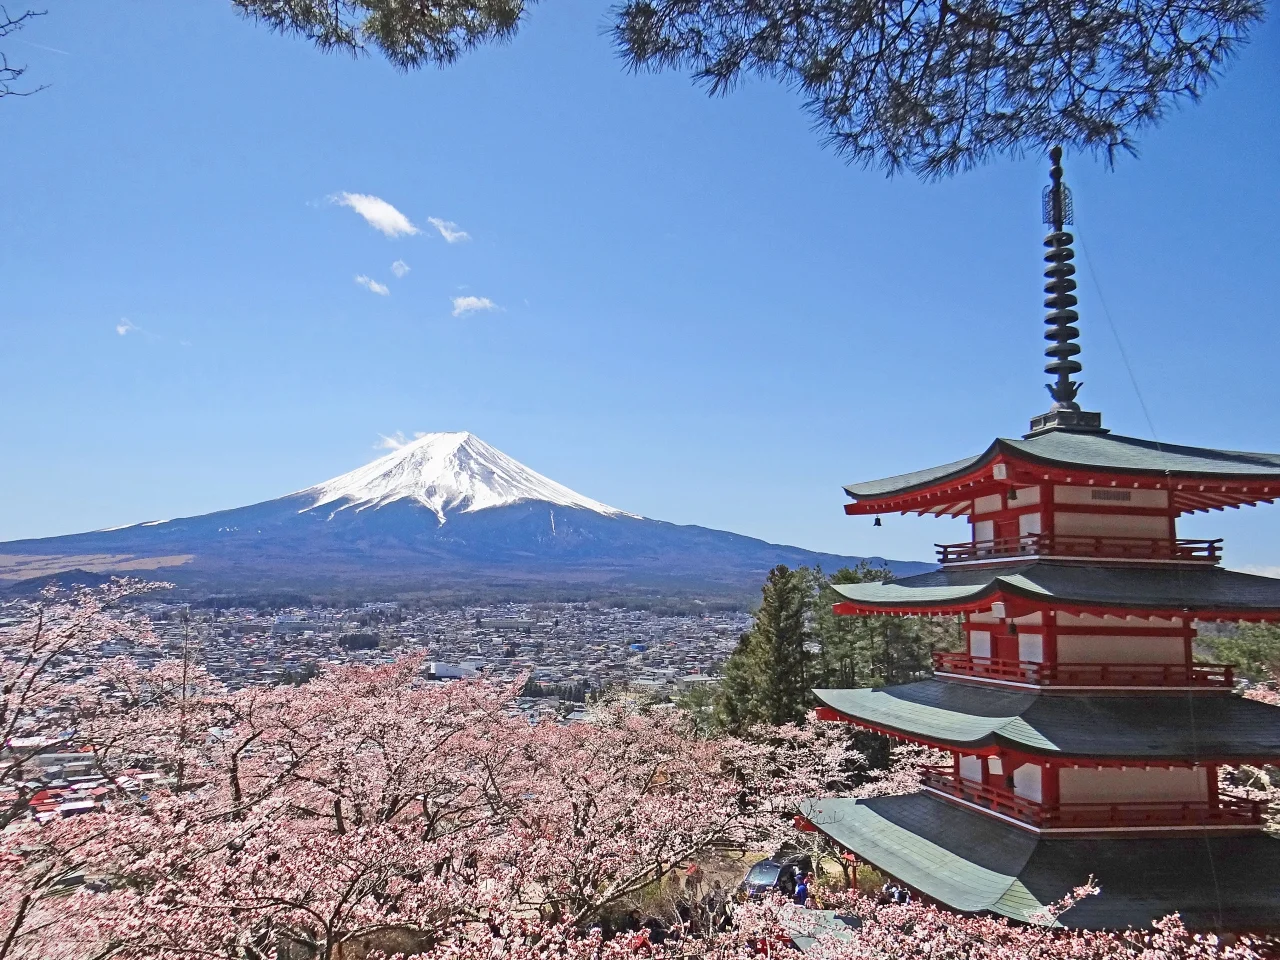 Mt. Fuji& Five Story Pagoda with Cherry Blossoms